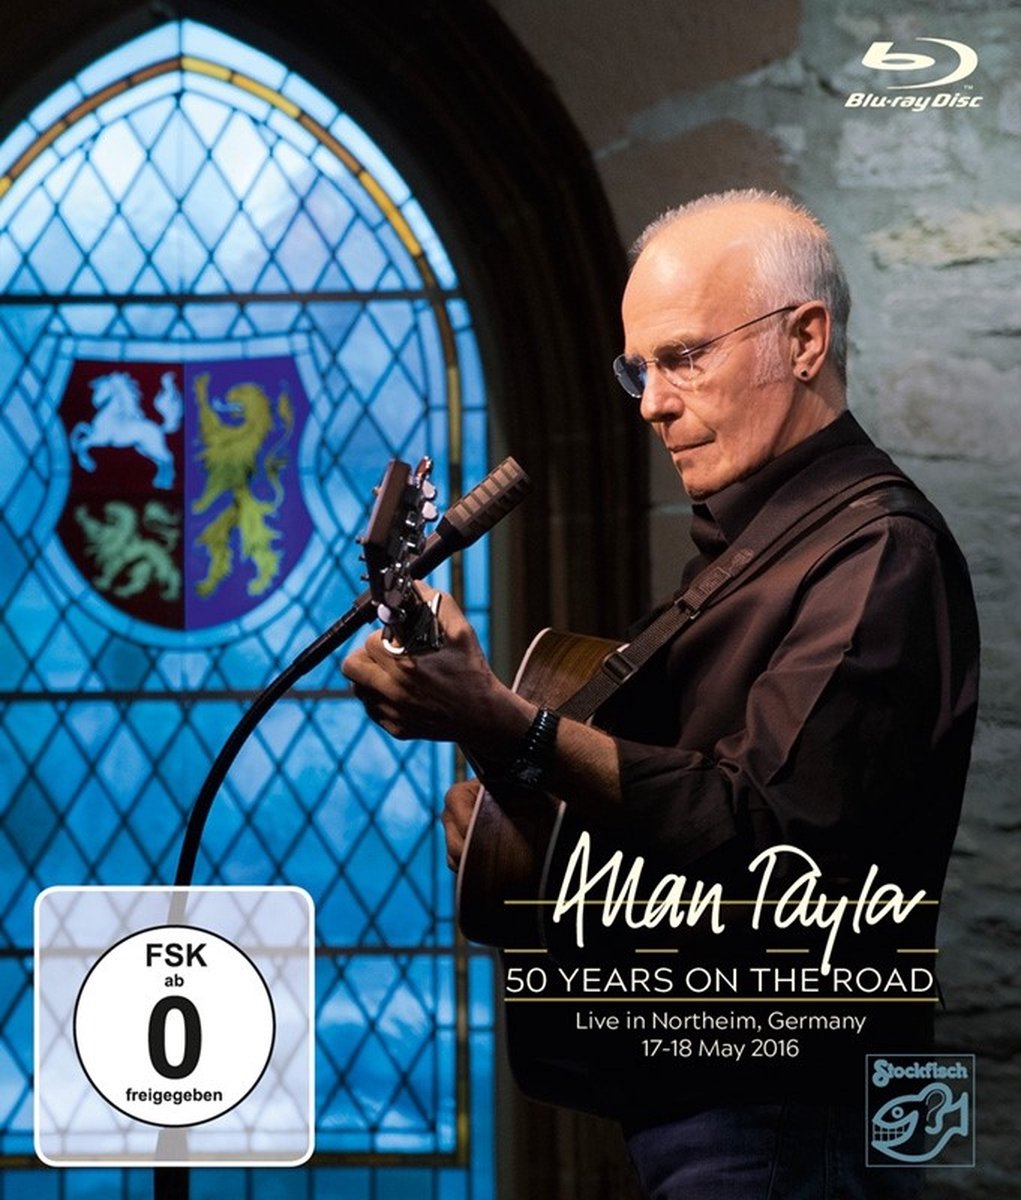 Allan Taylor - 50 Years On The Road (Blu-ray)